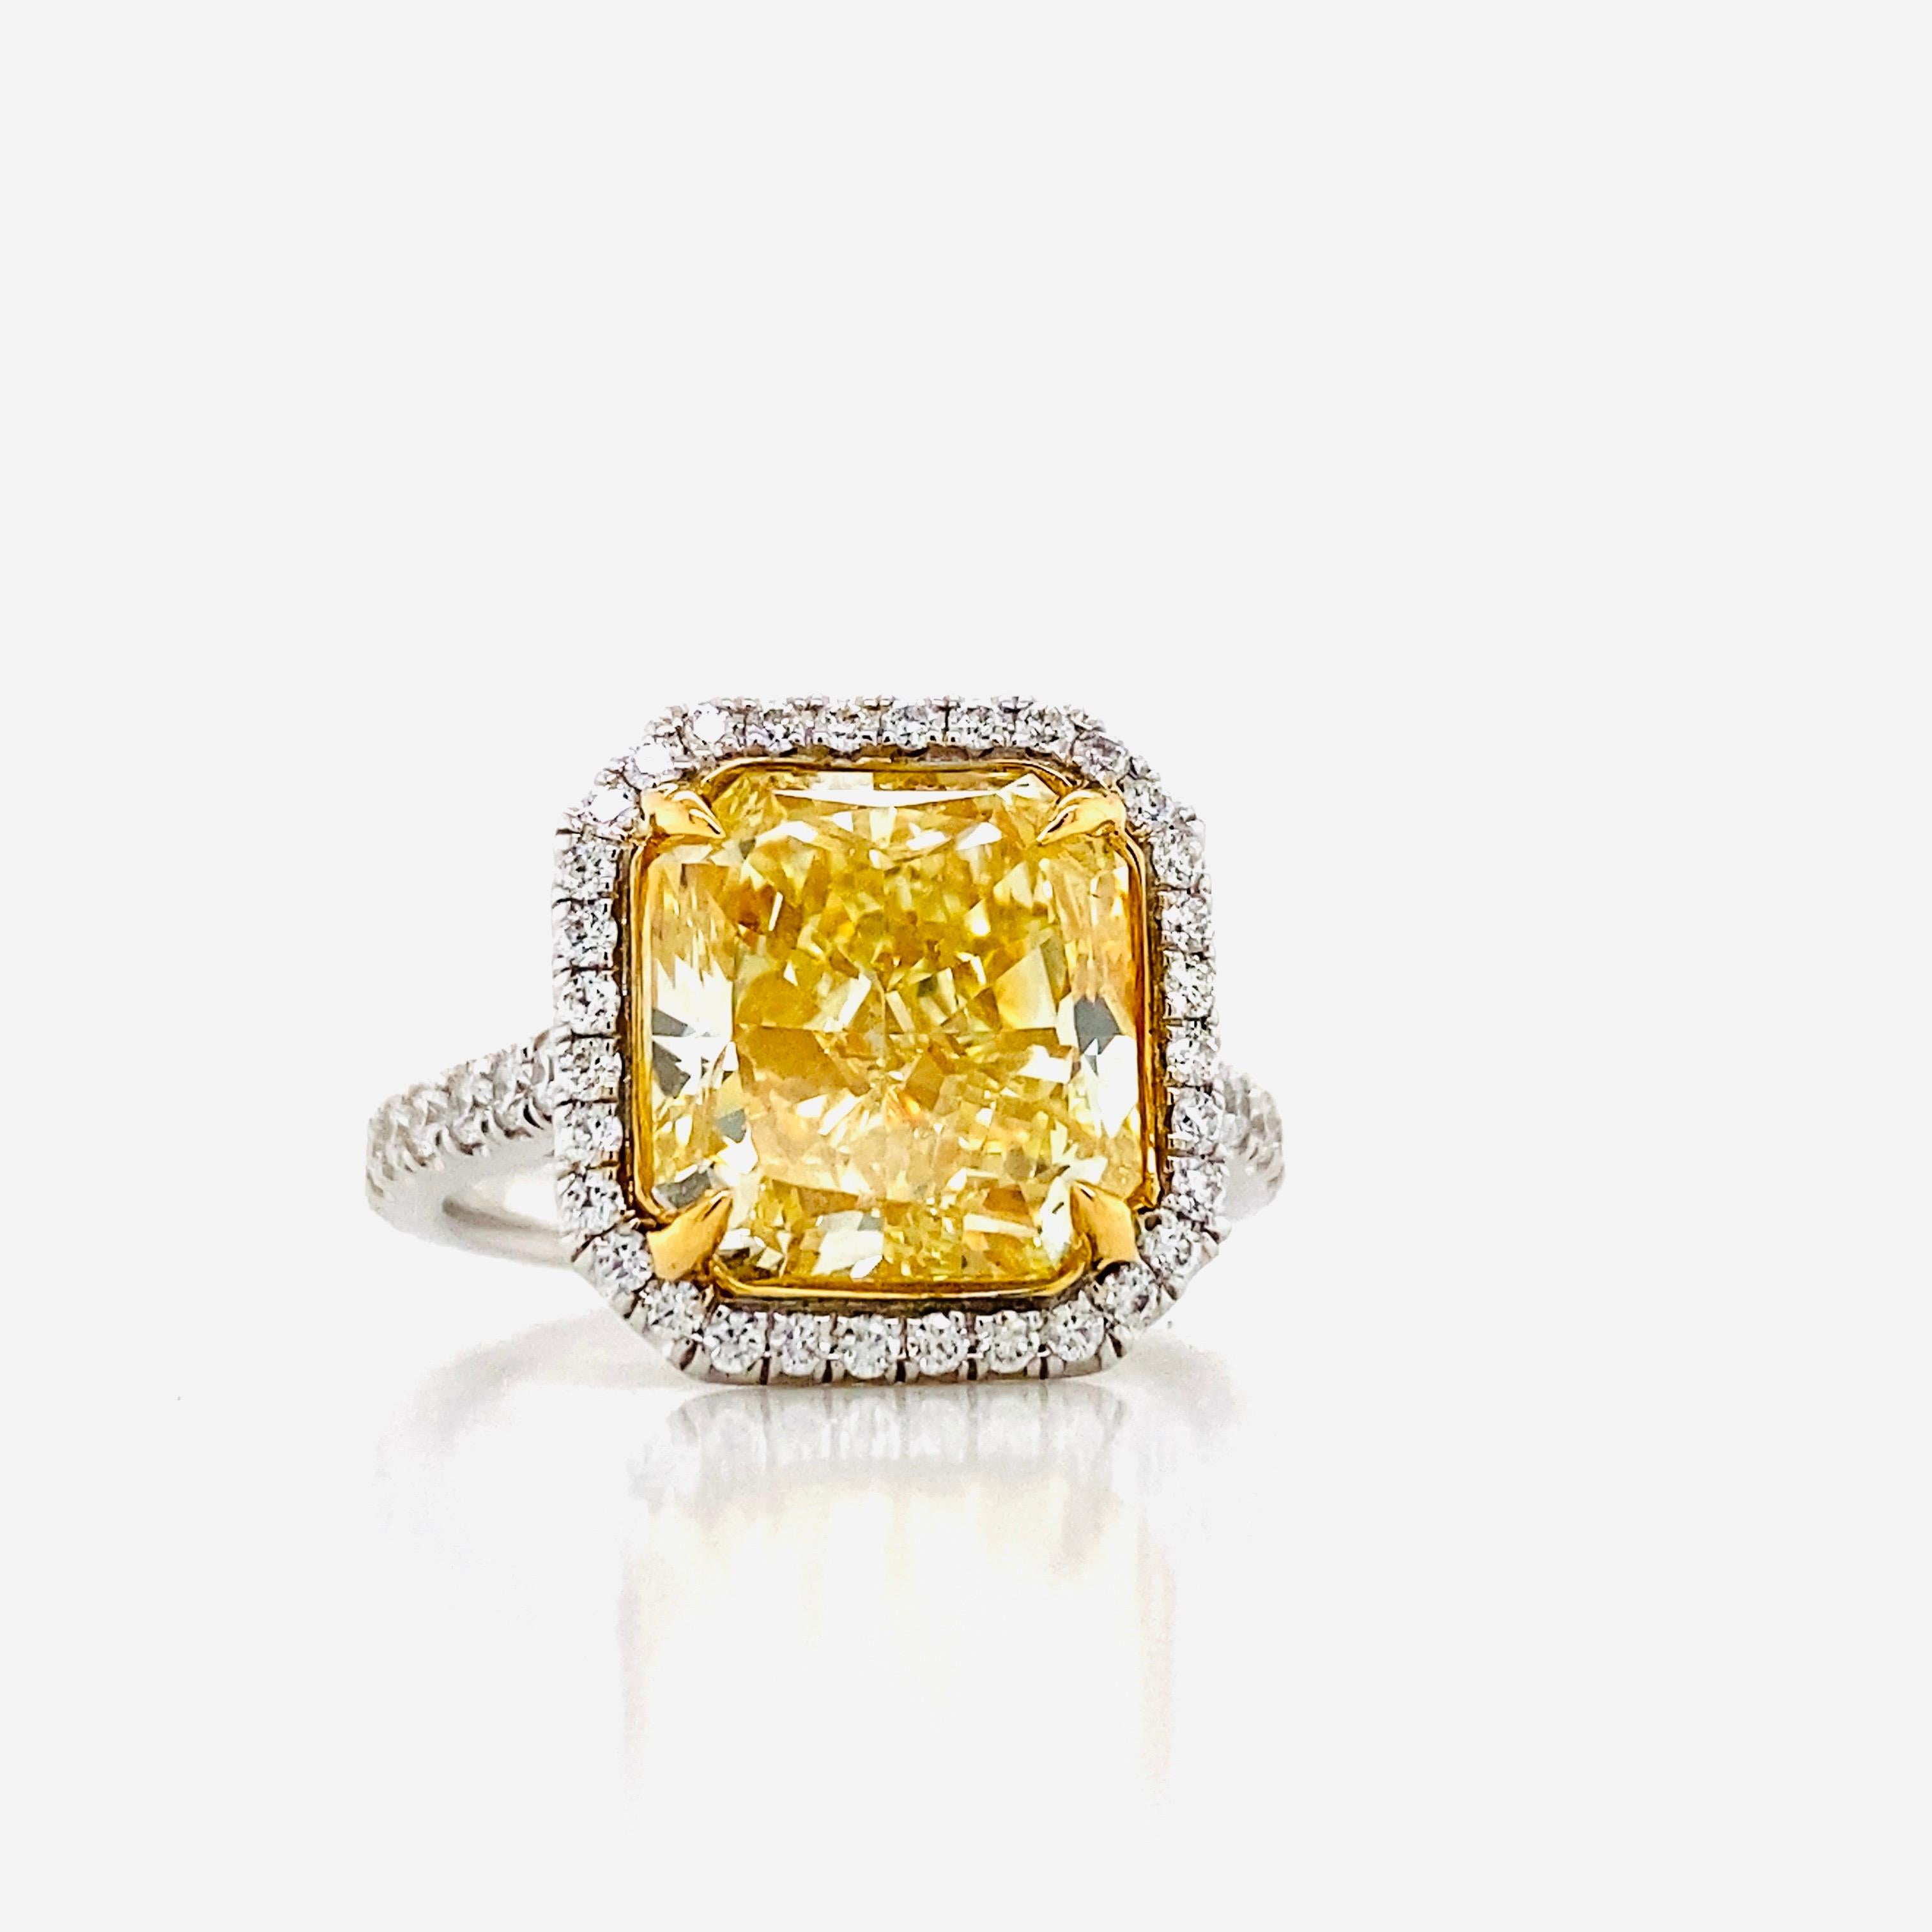 From the Emilio Jewelry Museum Vault, Showcasing a magnificent investment grade 4.50 carat natural fancy yellowish green diamond set in the center. A pure green diamond with no overtone would cost three times the price which is why this ring is a